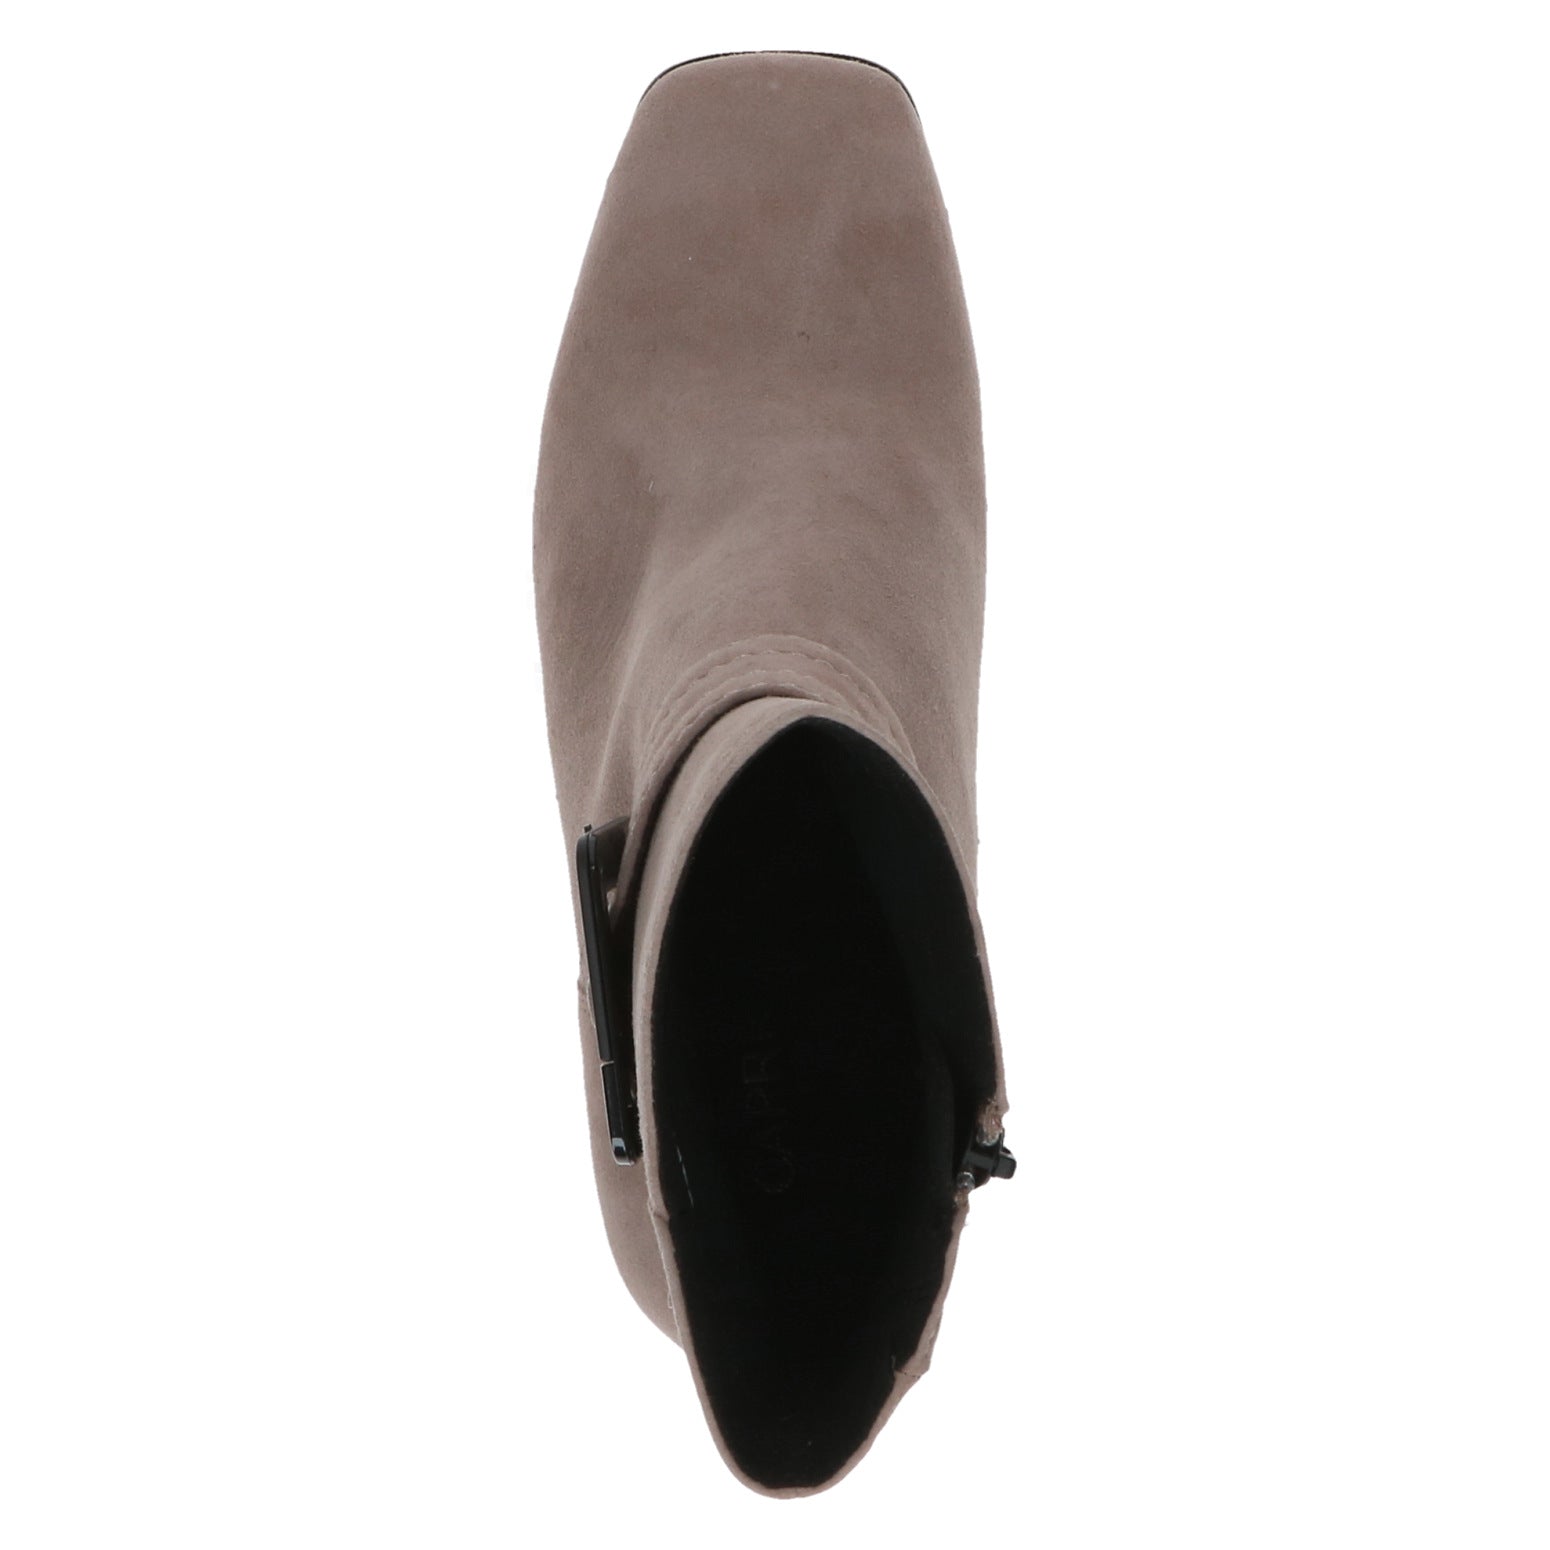 Caprice Mud Suede Boot CPW4